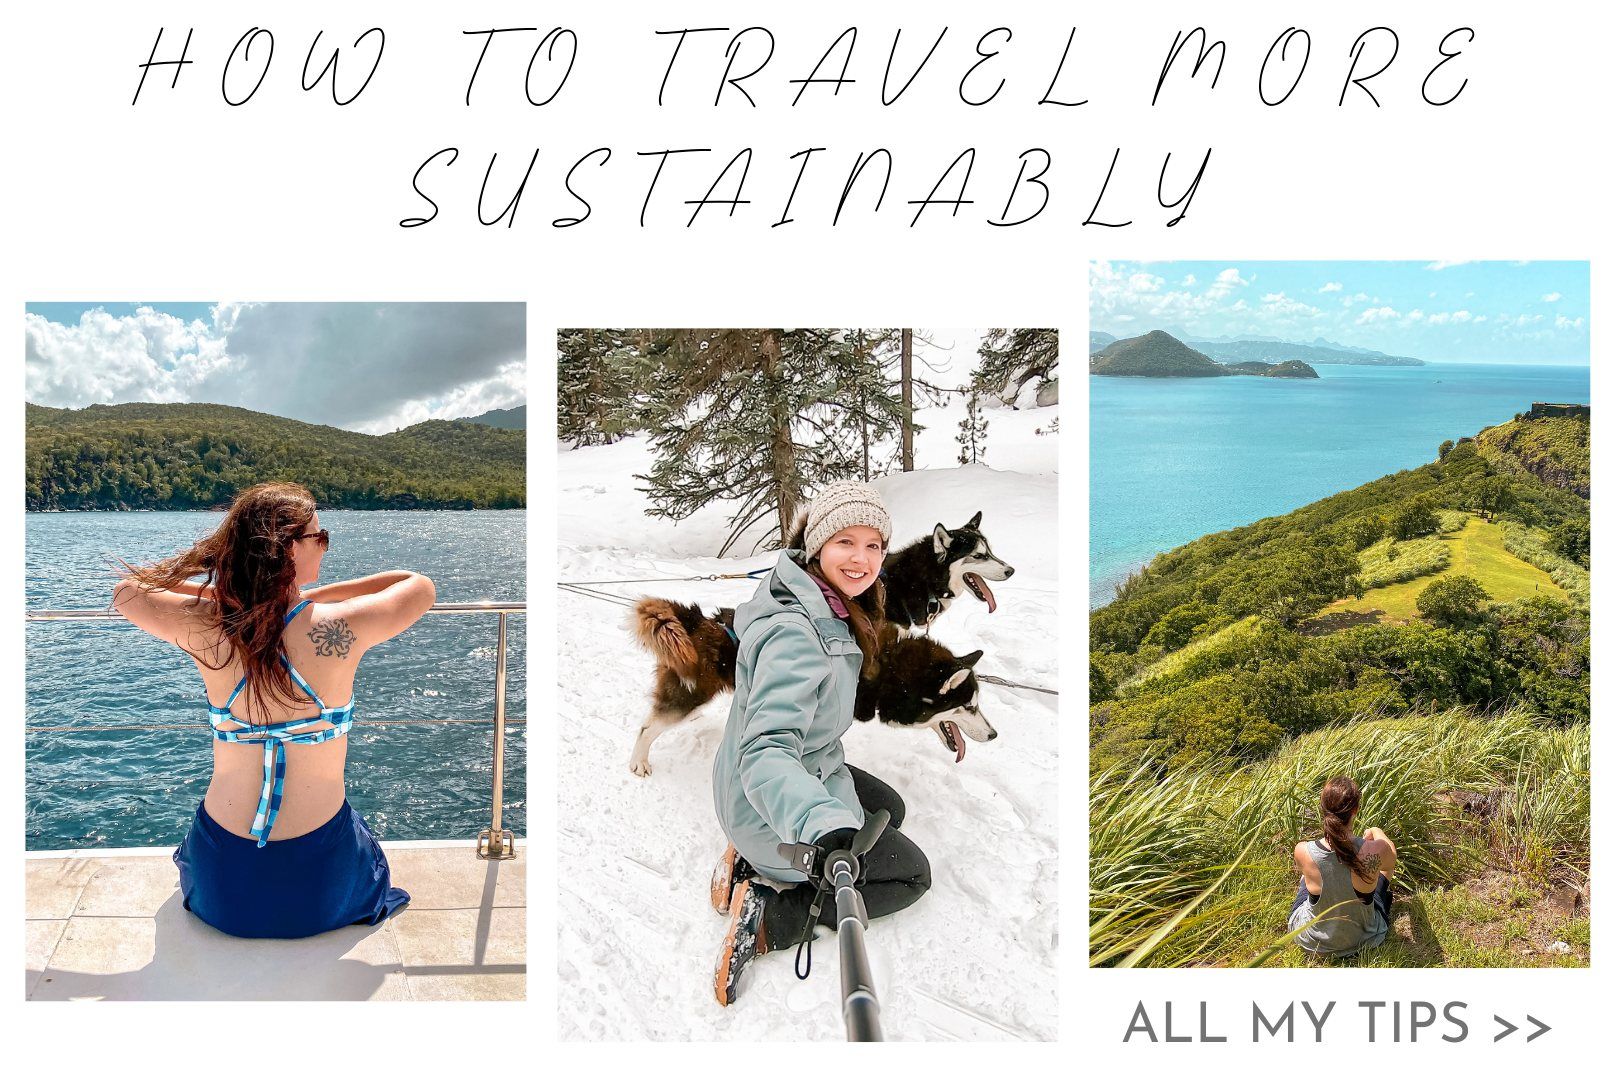 Your Ultimate Guide To Eco-Travel